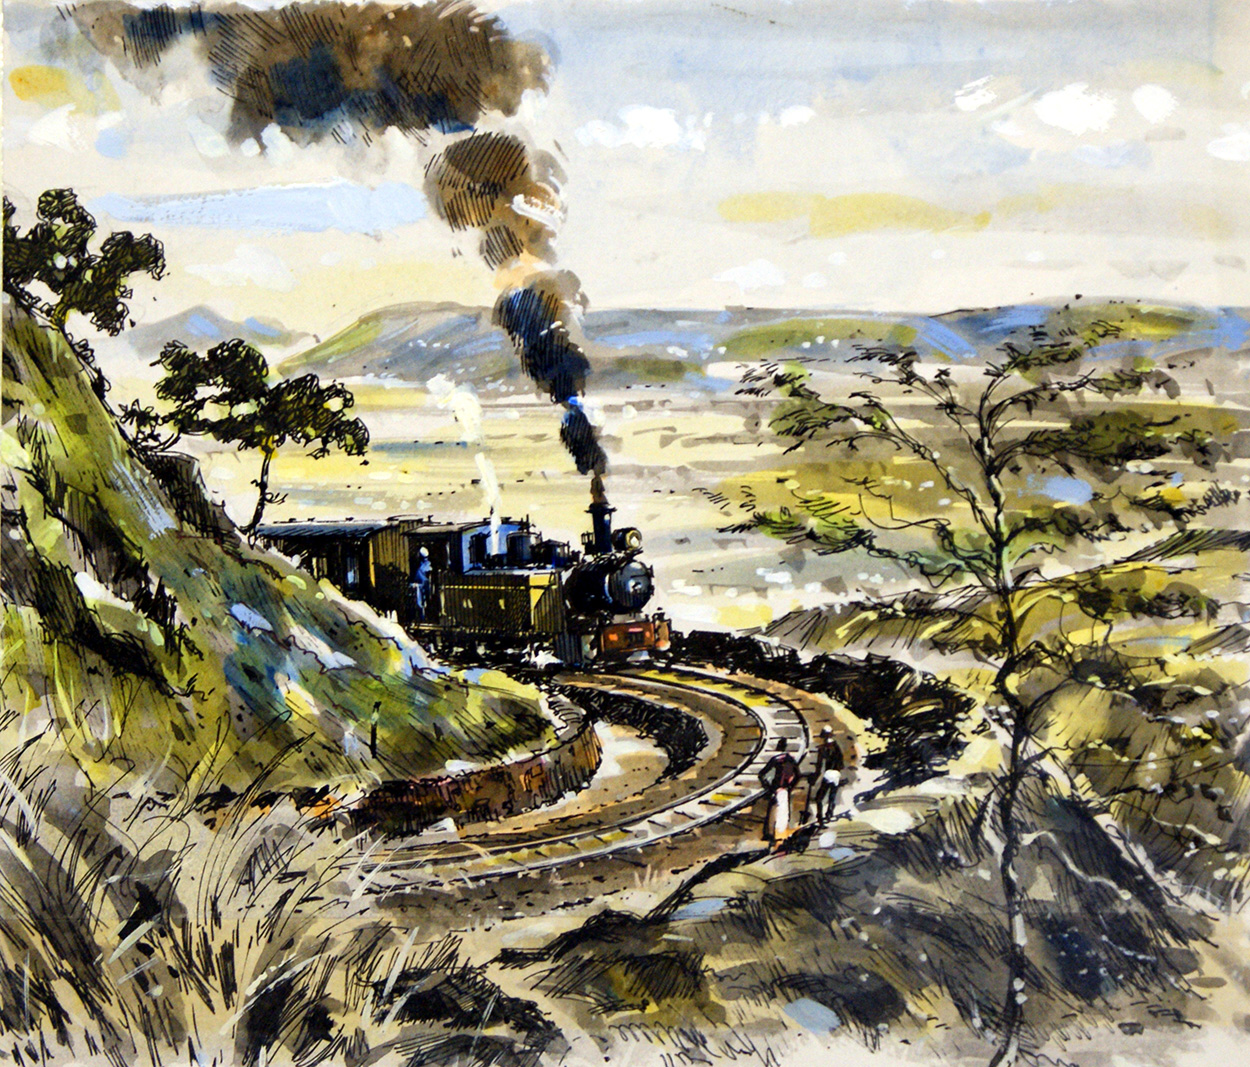 The Tracks of an Imperial Past (Original) art by John S Smith Art at The Illustration Art Gallery